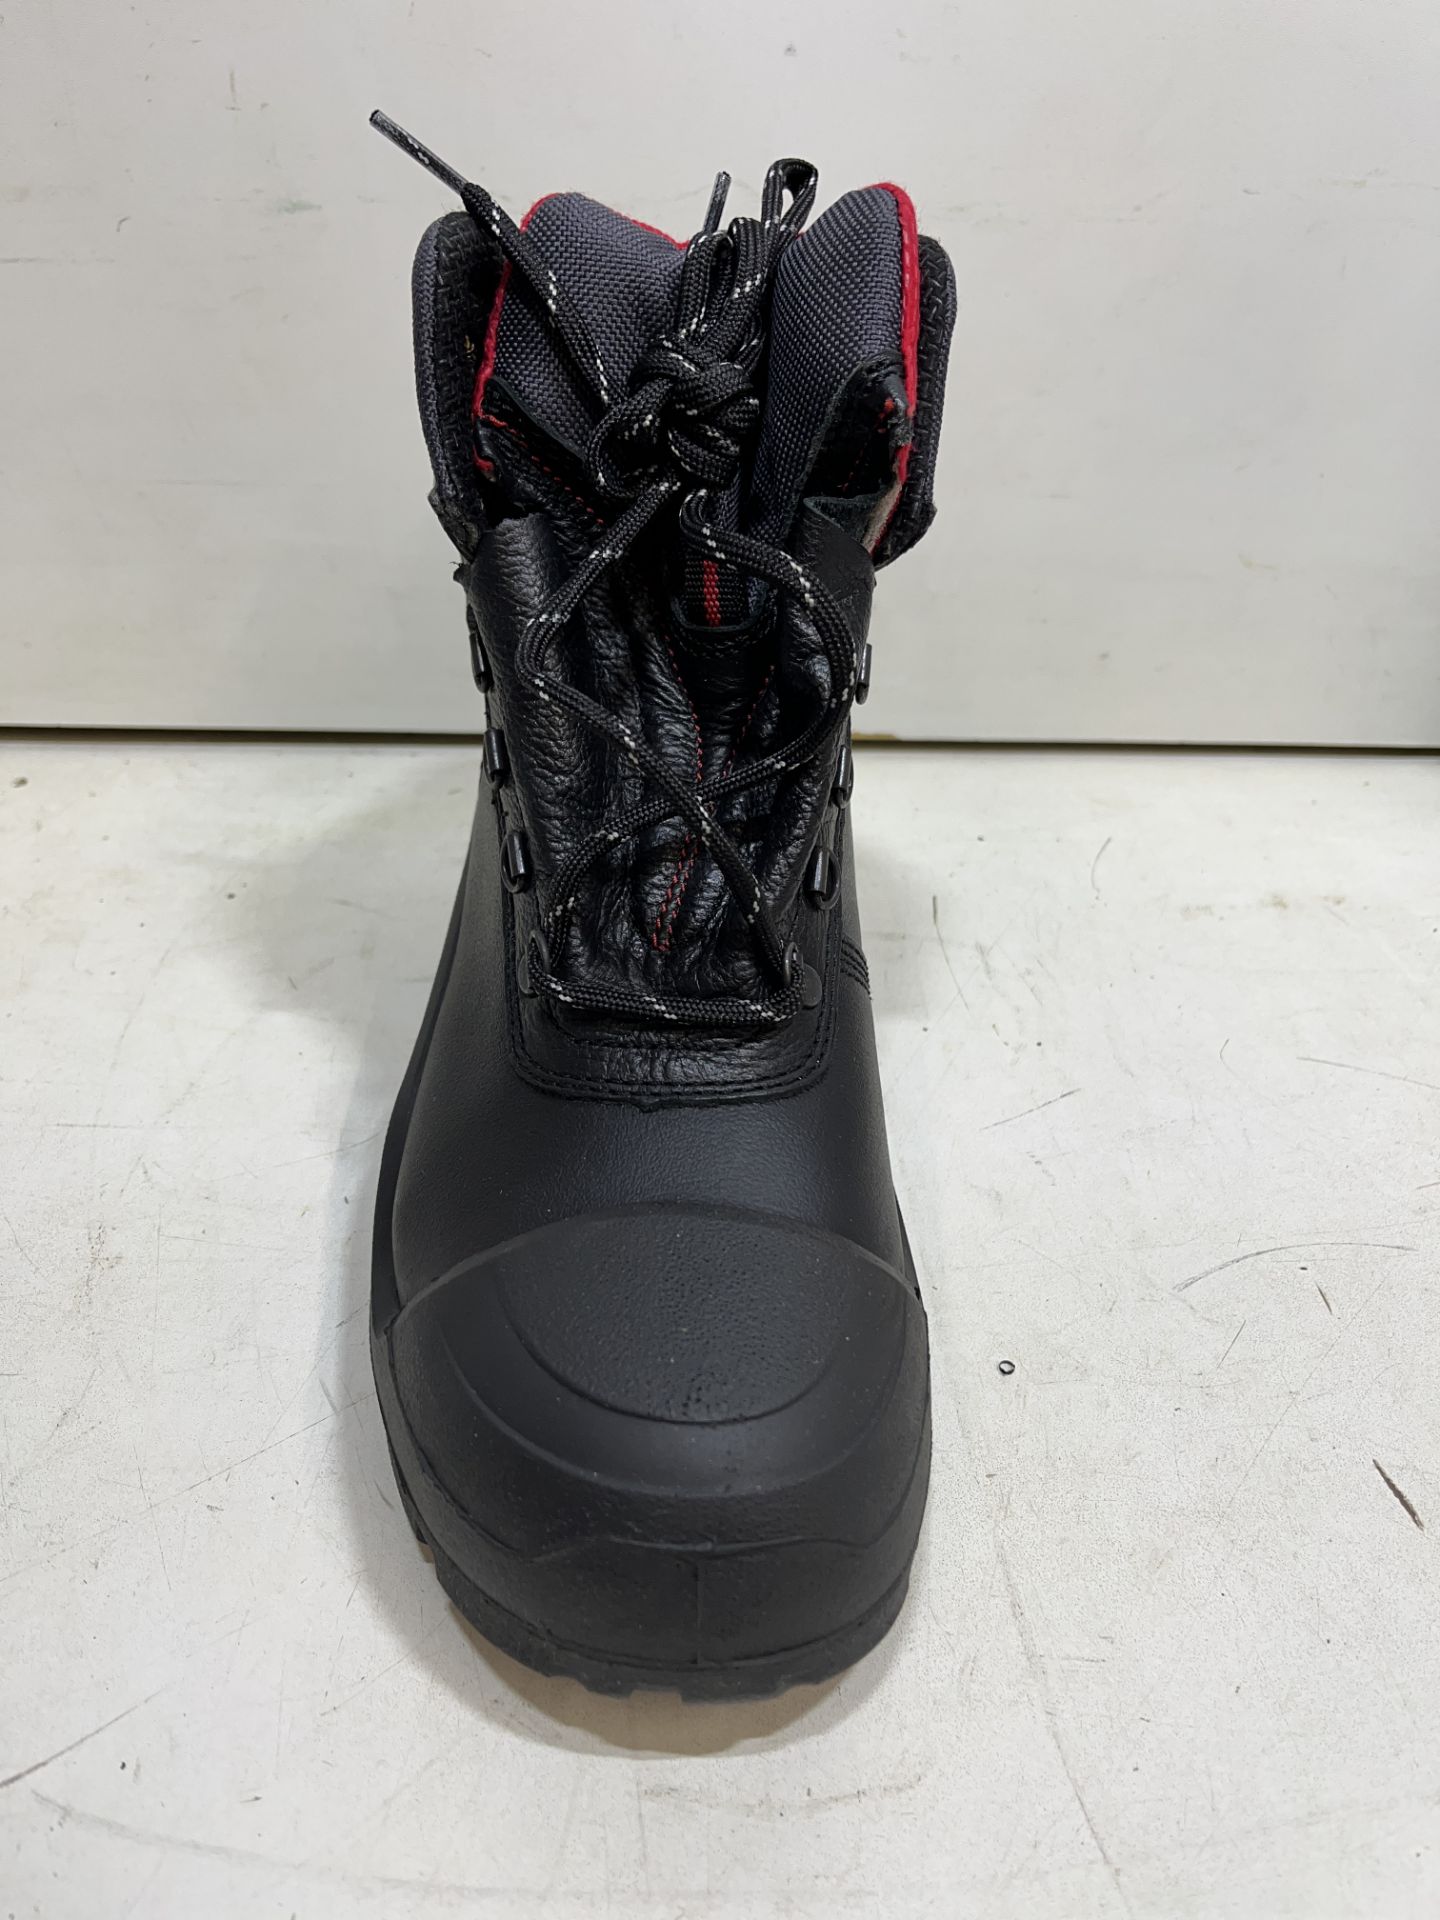 Uvex Safety Boots | UK 8 - Image 3 of 4